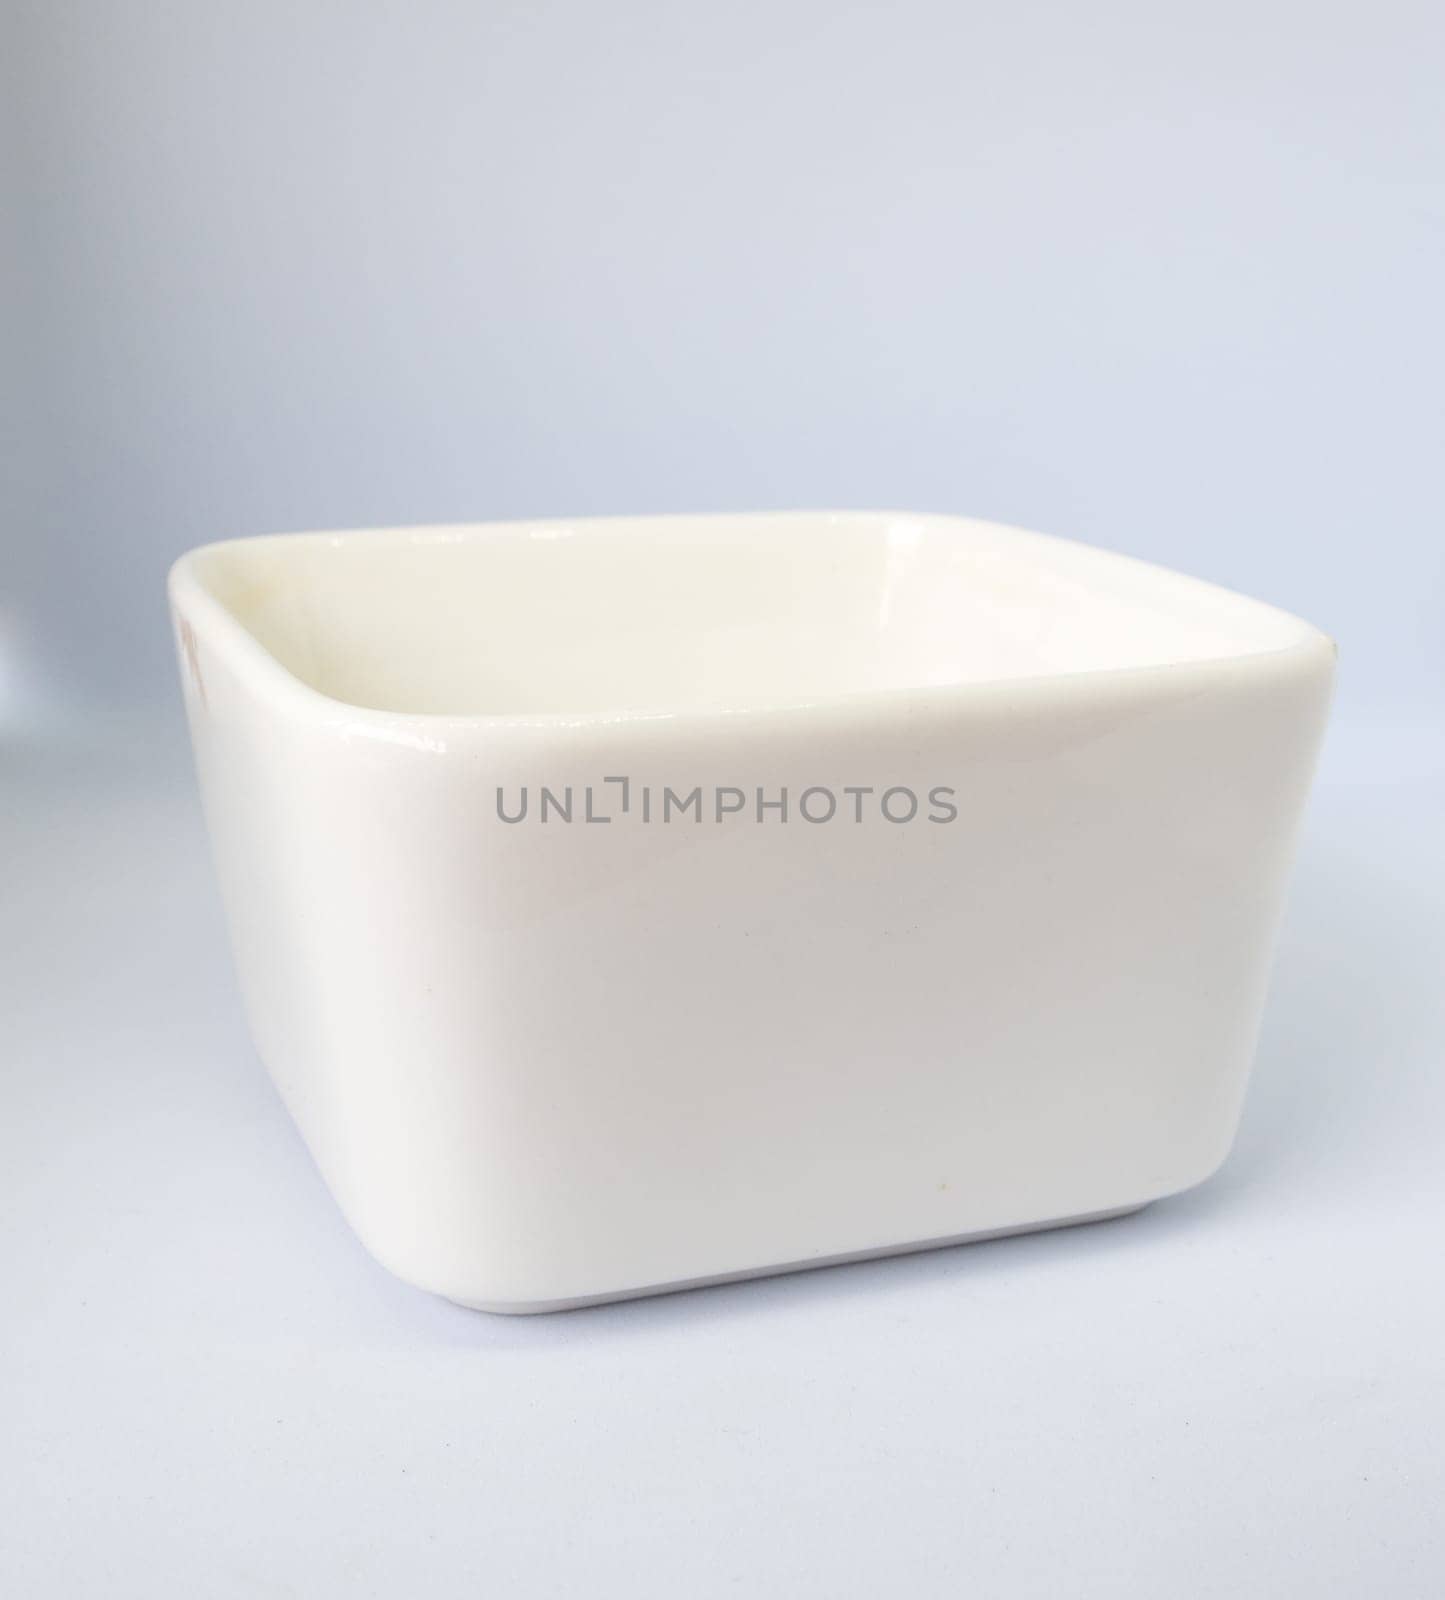 The ceramic cup has been adapted for planting small pot plants by Satakorn